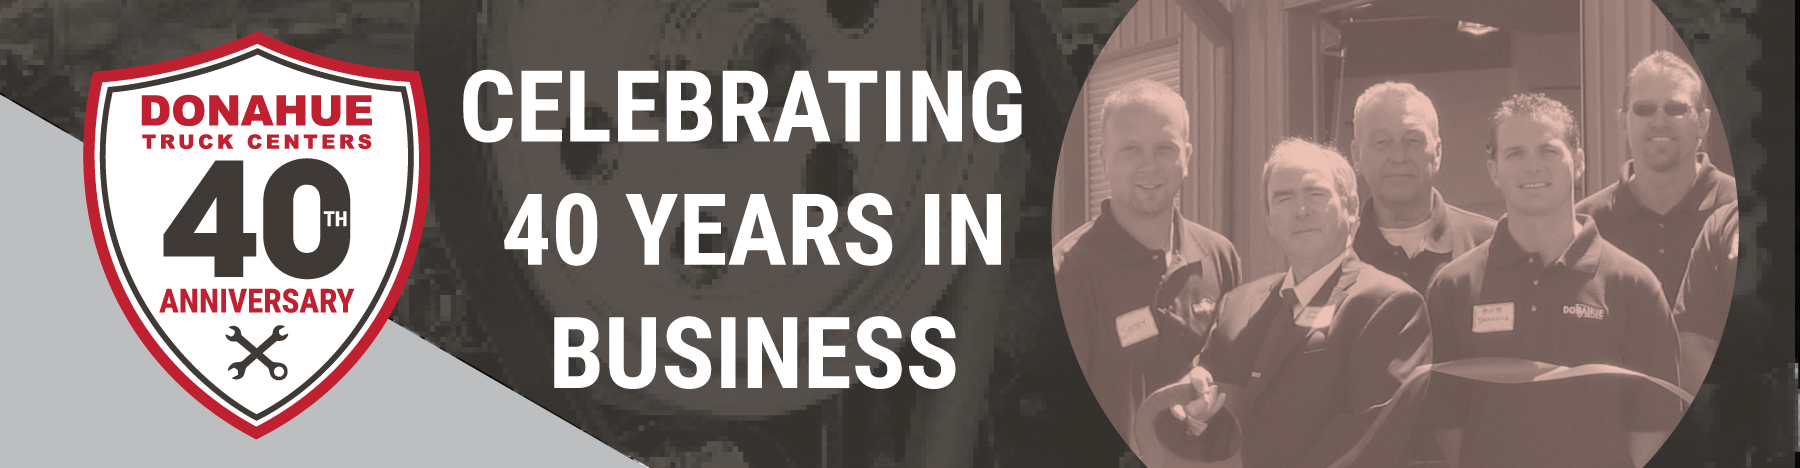 Celebrating 40 years in Business